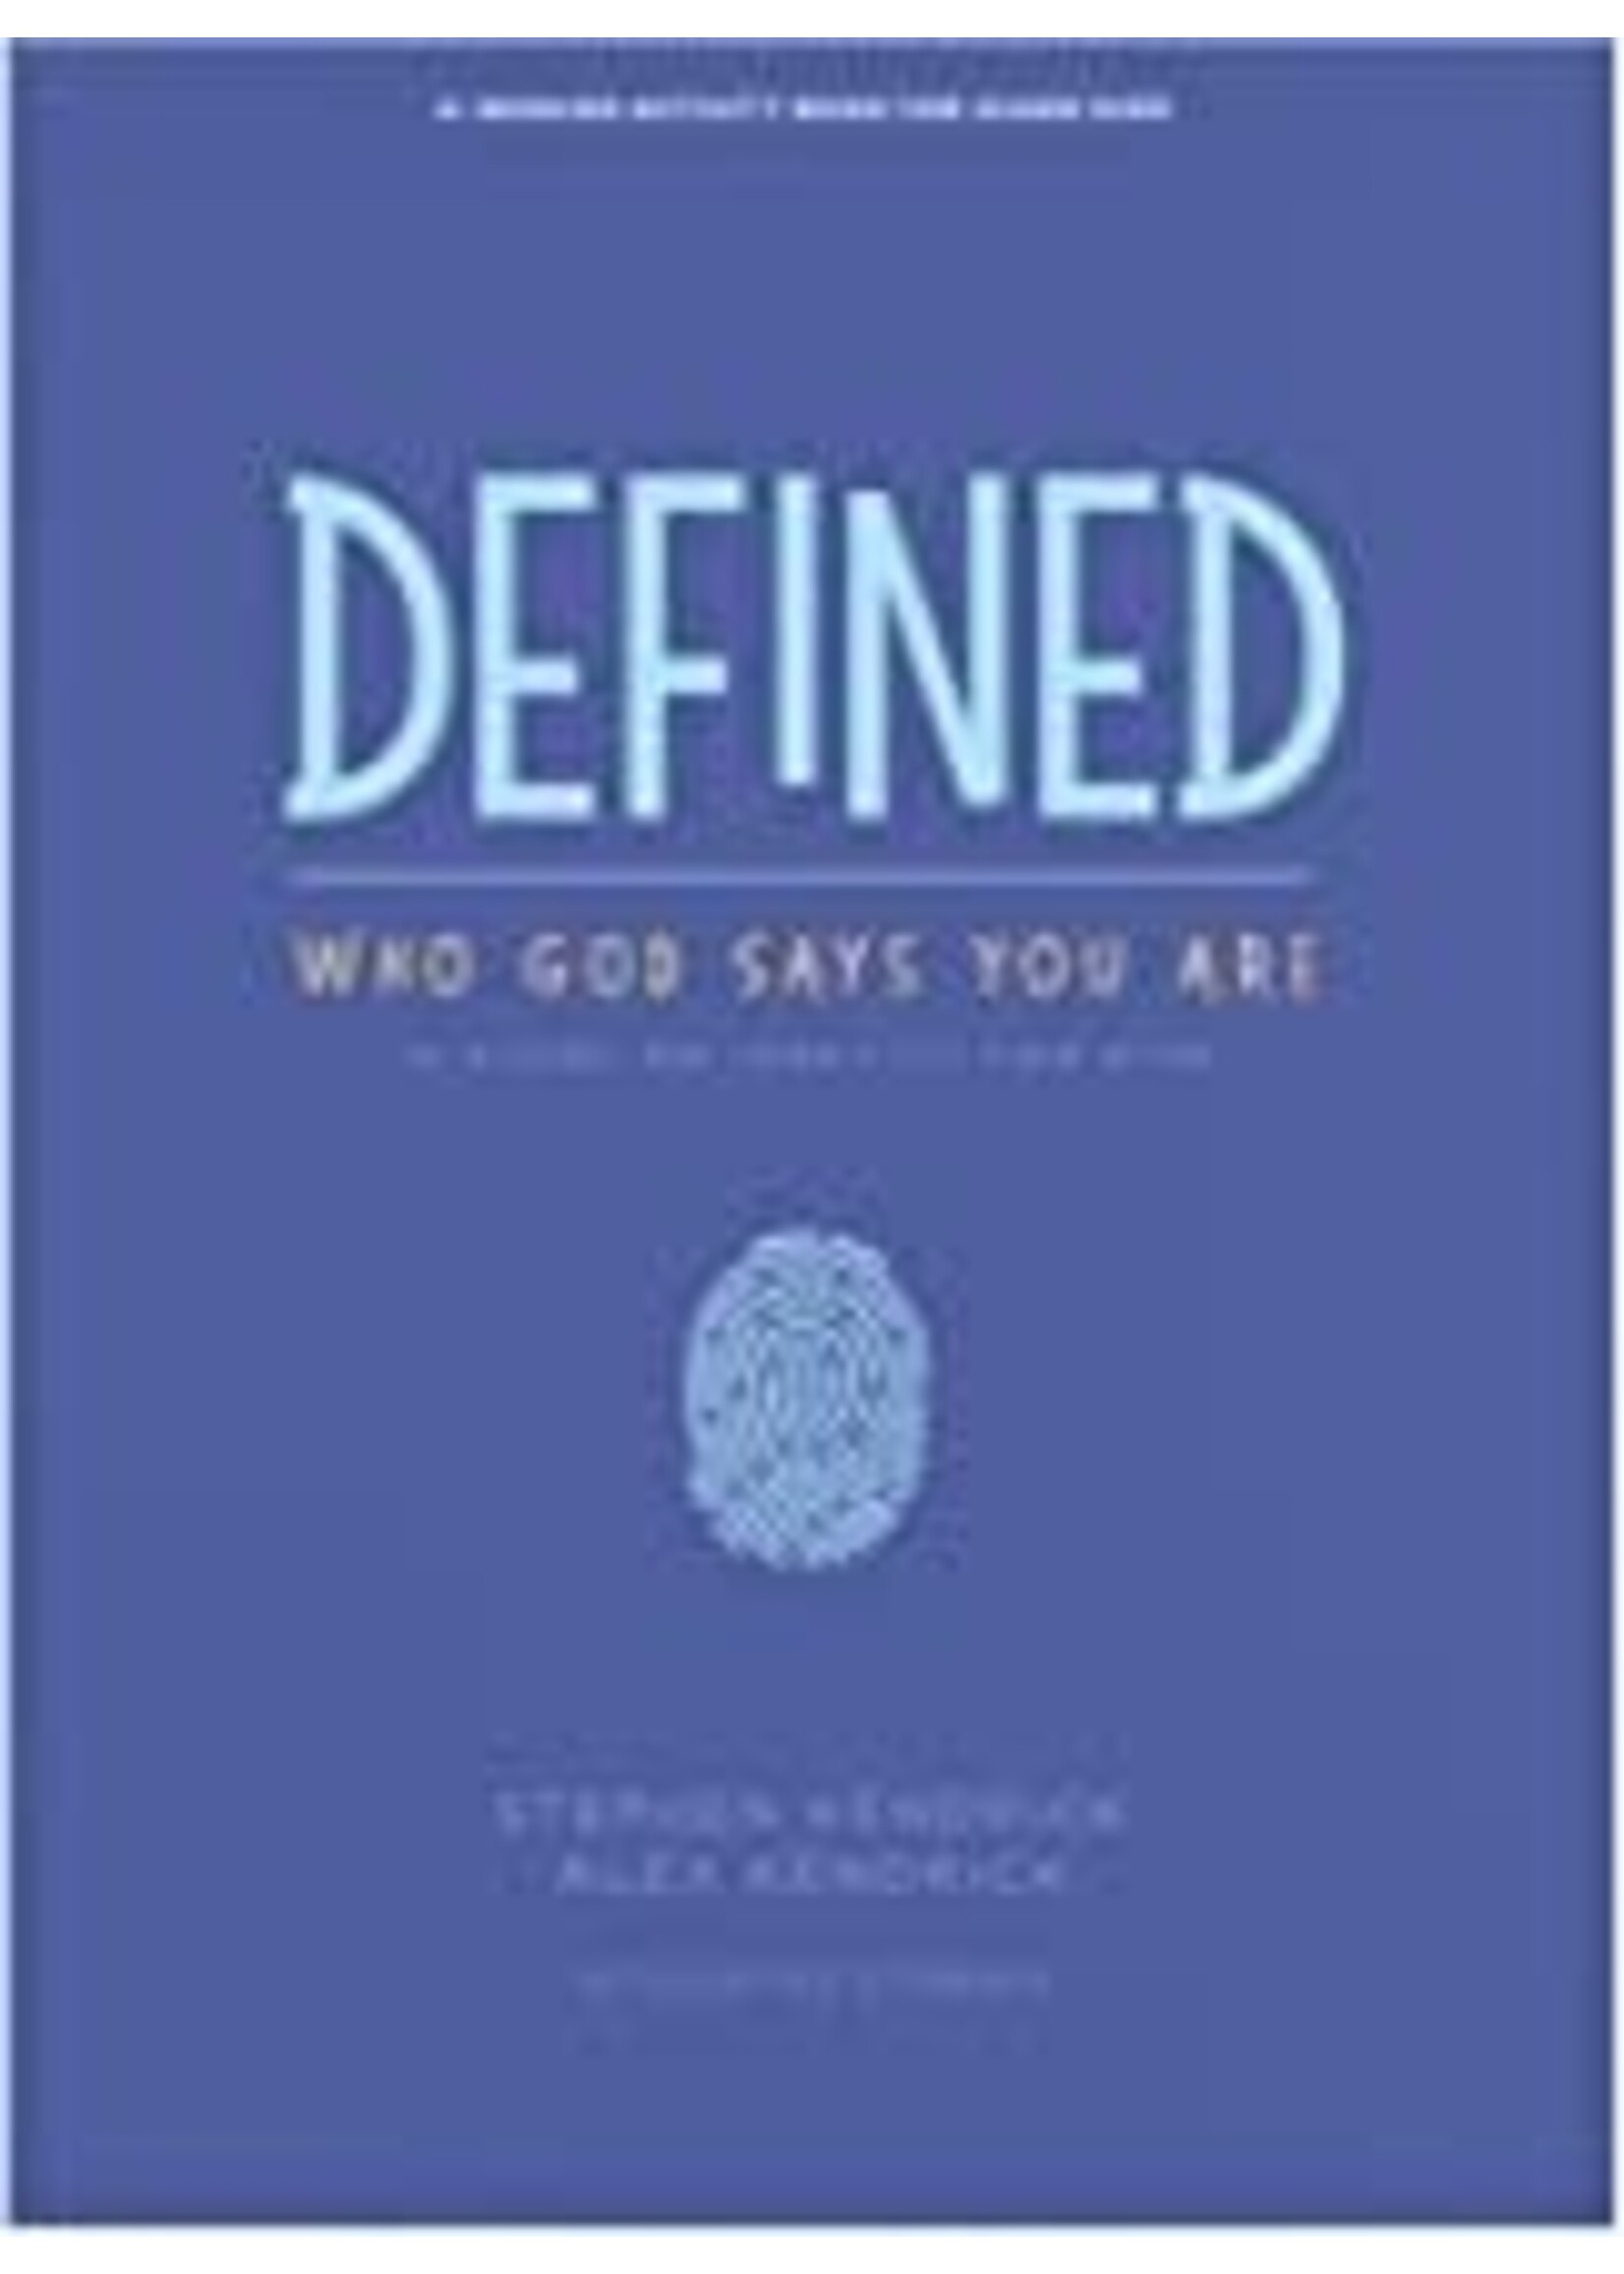 DEFINED WHO GOD SAYS YOU ARE OLDER